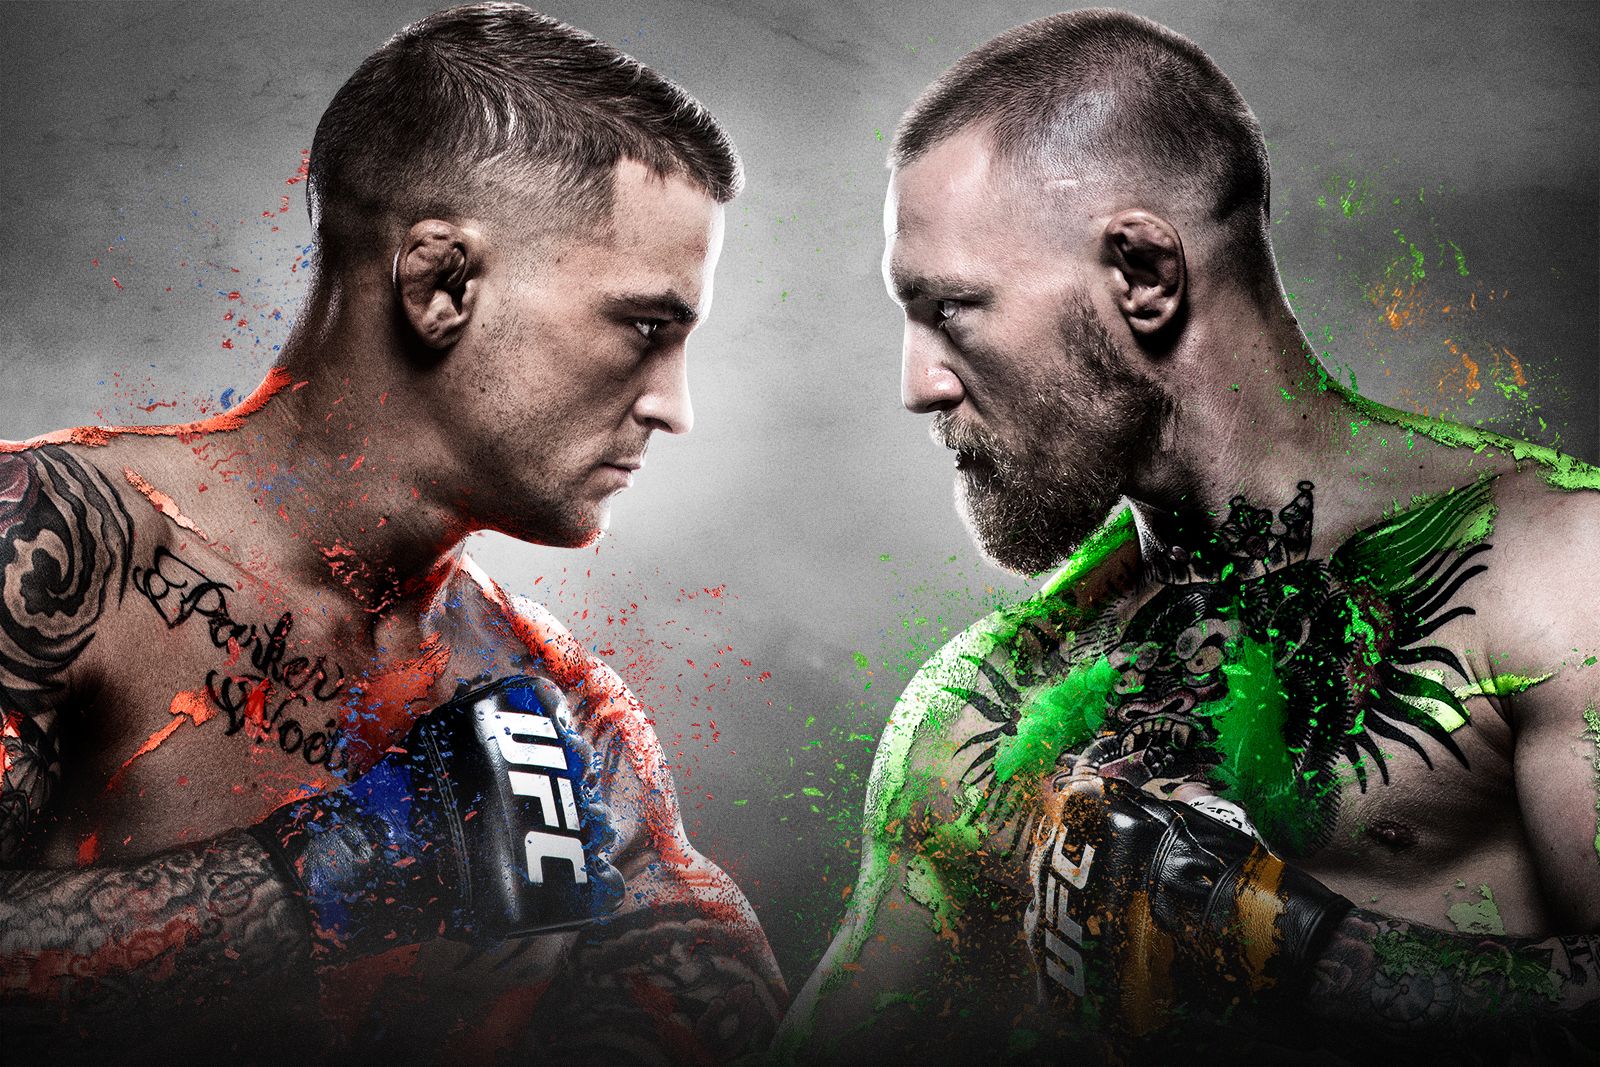 Conor Mcgregor vs Dustin Poirier 2 fight: Where and how to watch it photo 1